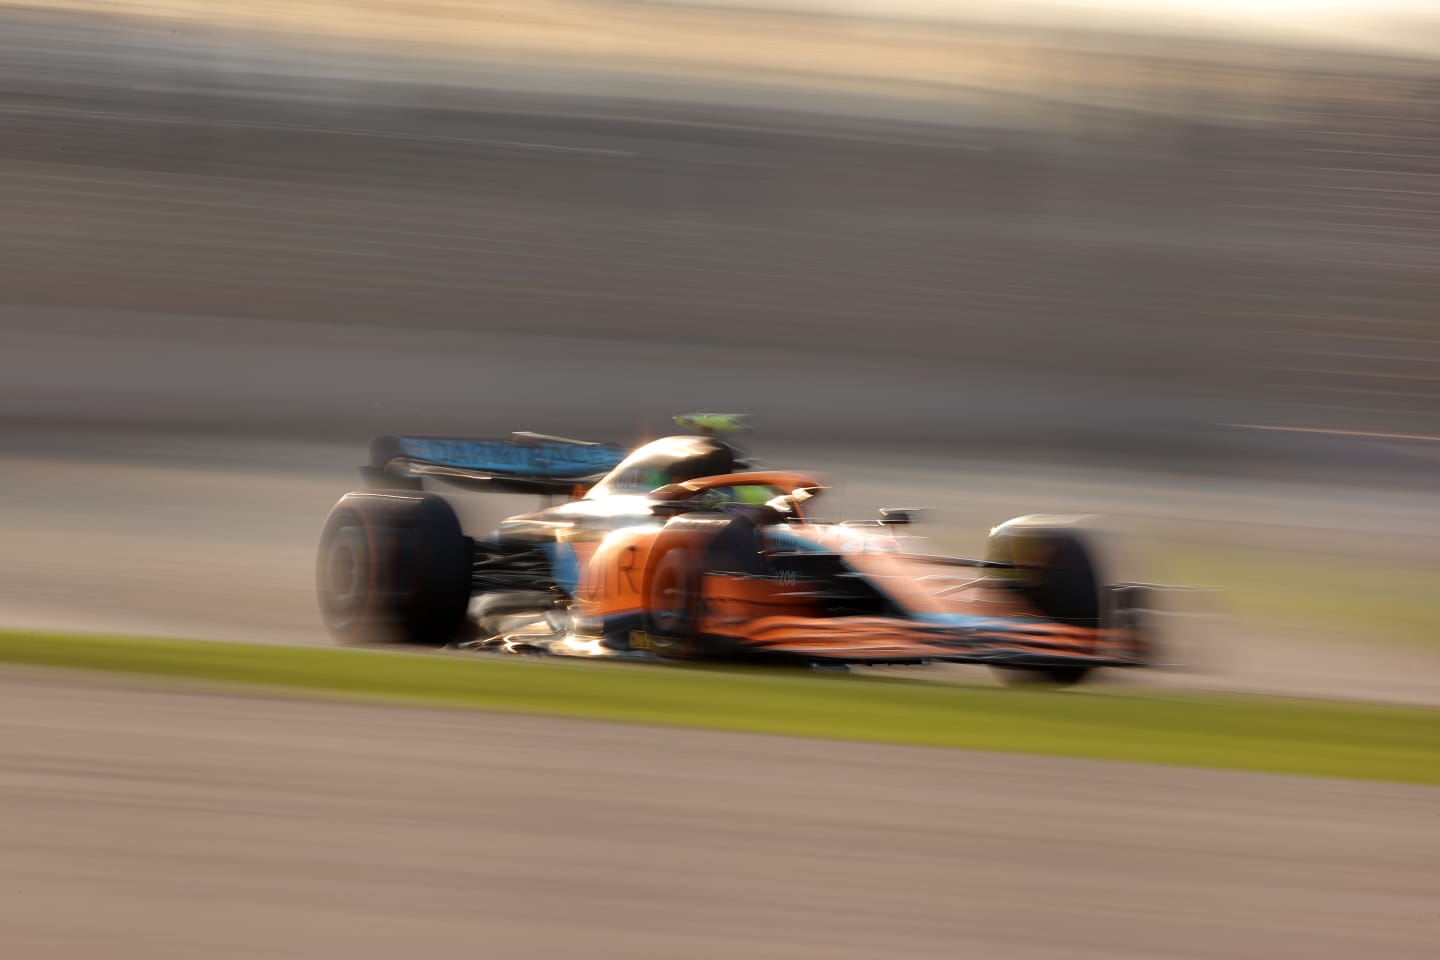 MELBOURNE, AUSTRALIA - APRIL 09: Lando Norris of Great Britain driving the (4) McLaren MCL36 Mercedes on track during qualifying ahead of the F1 Grand Prix of Australia at Melbourne Grand Prix Circuit on April 09, 2022 in Melbourne, Australia. (Photo by Robert Cianflone/Getty Images)